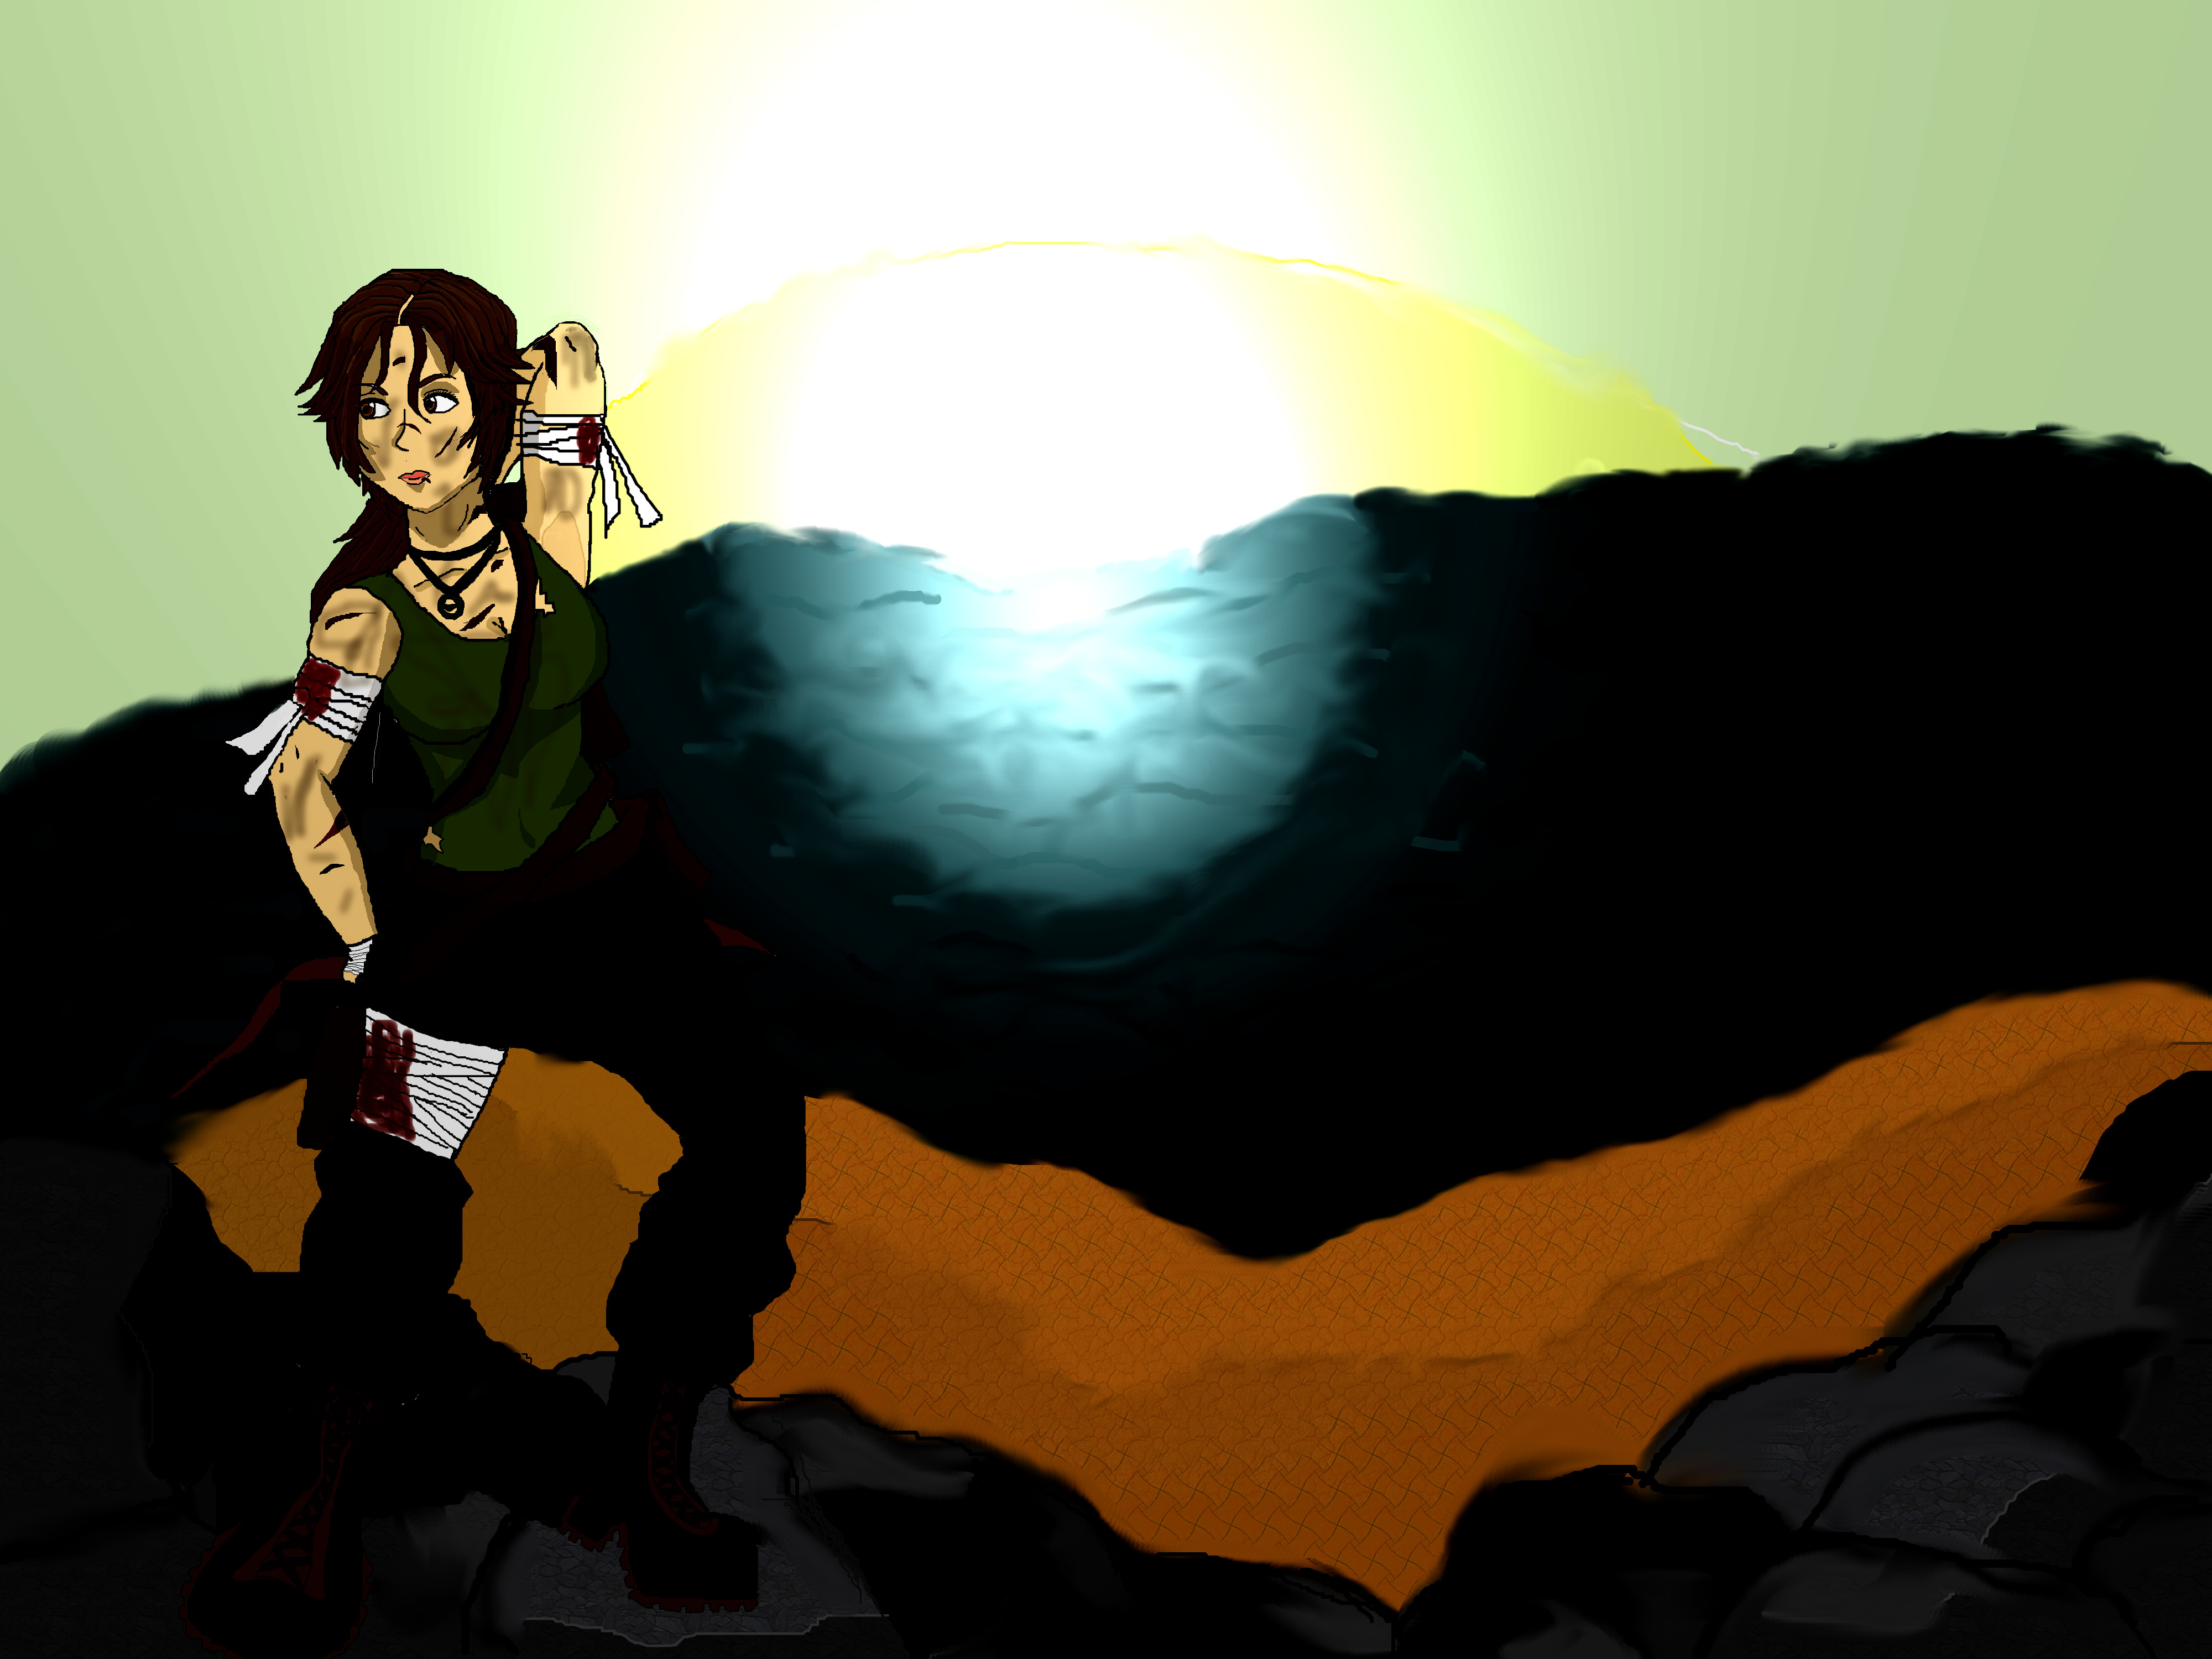 Starting off of a new shore (TombRaider Entry)